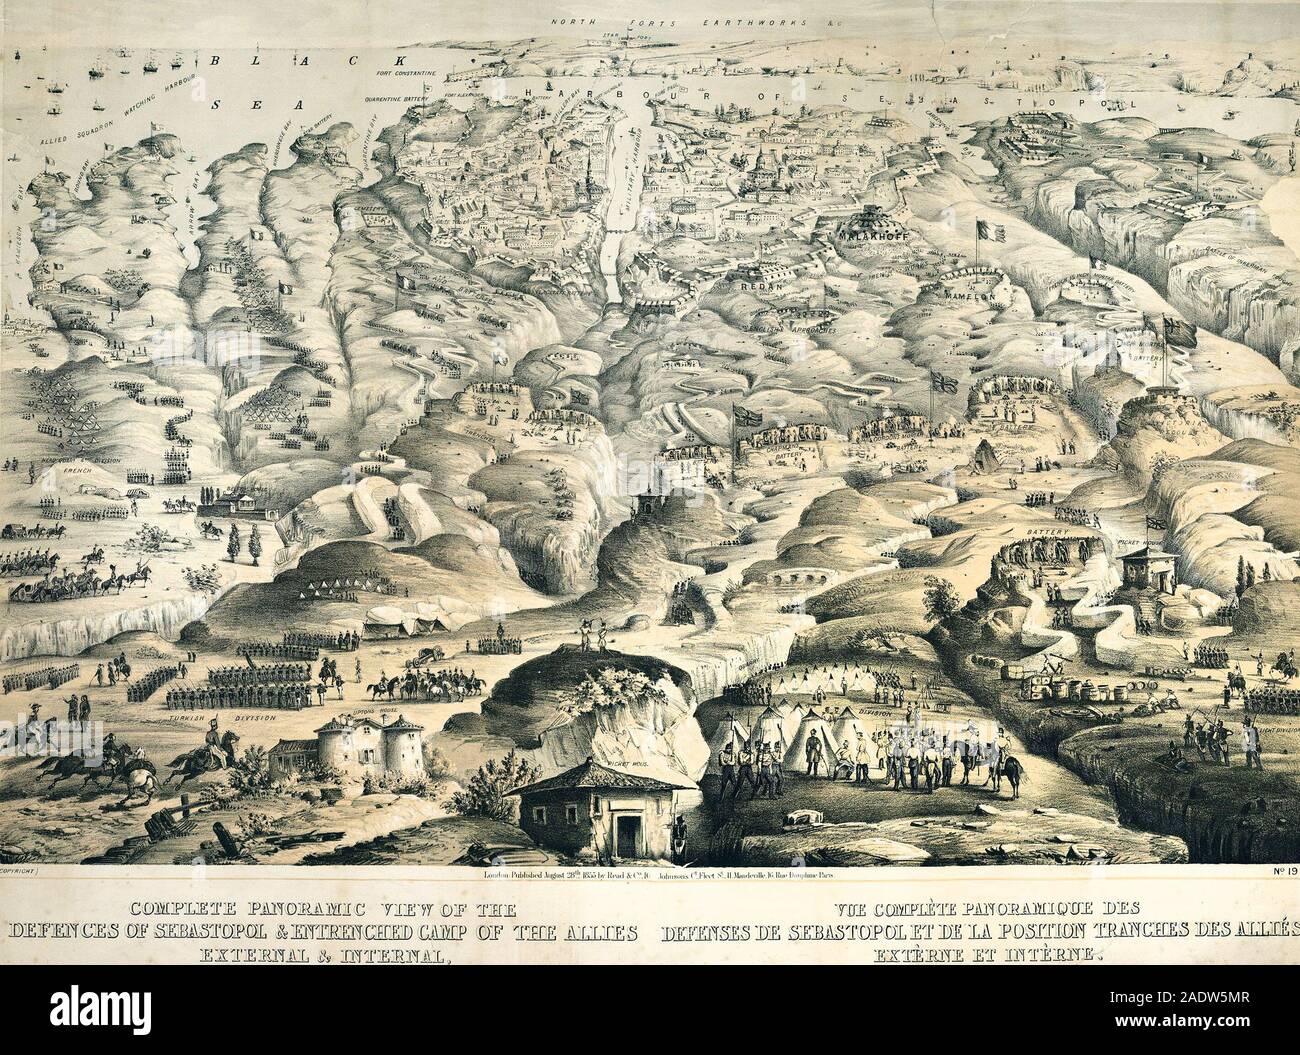 The Crimean War (1853-1856). Complete panoramic view of the defences of Sevastopol and entrenched camp of the allies external and internal. 19th century lithography. Stock Photo